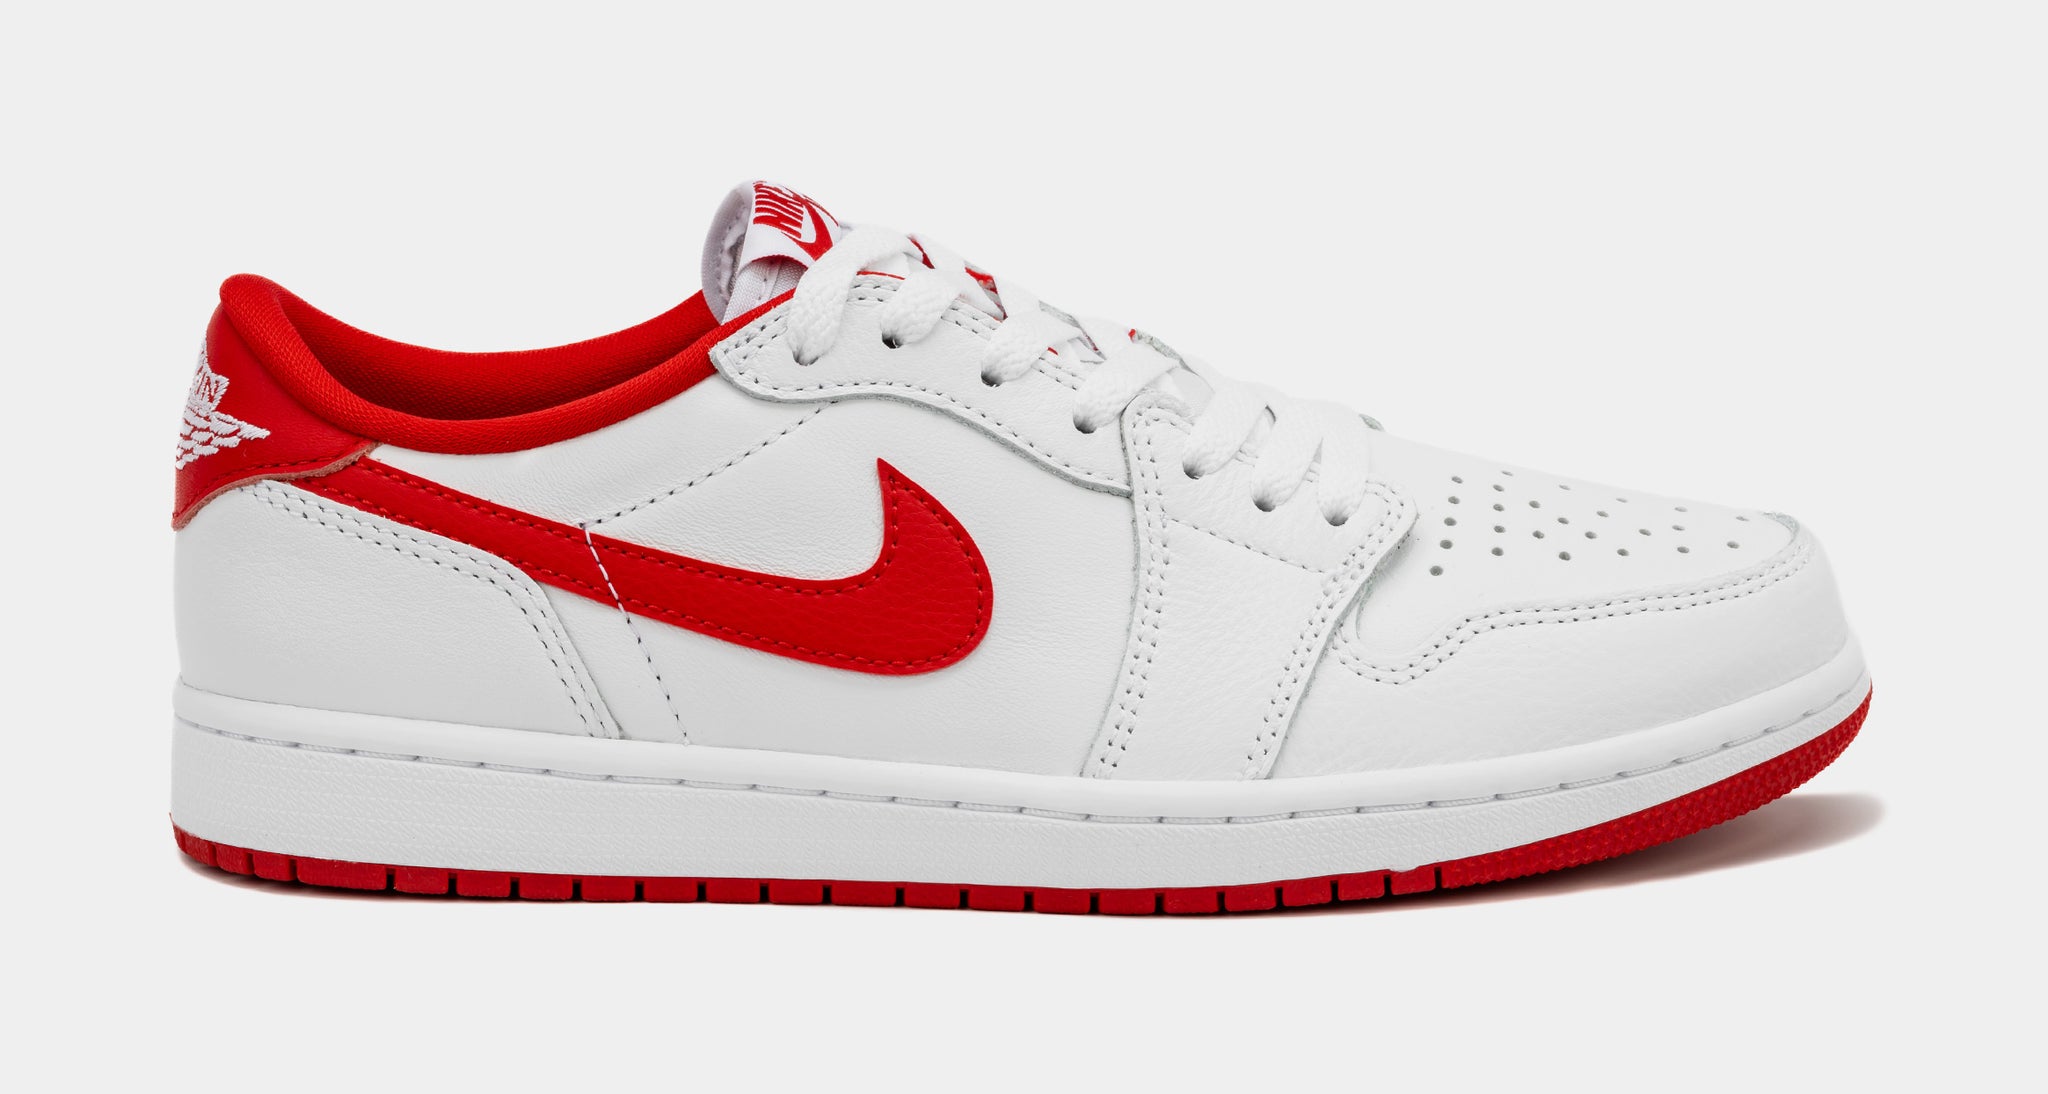 Air Jordan 1 Retro Low OG University Red Mens Lifestyle Shoes (White/Red)  Free Shipping